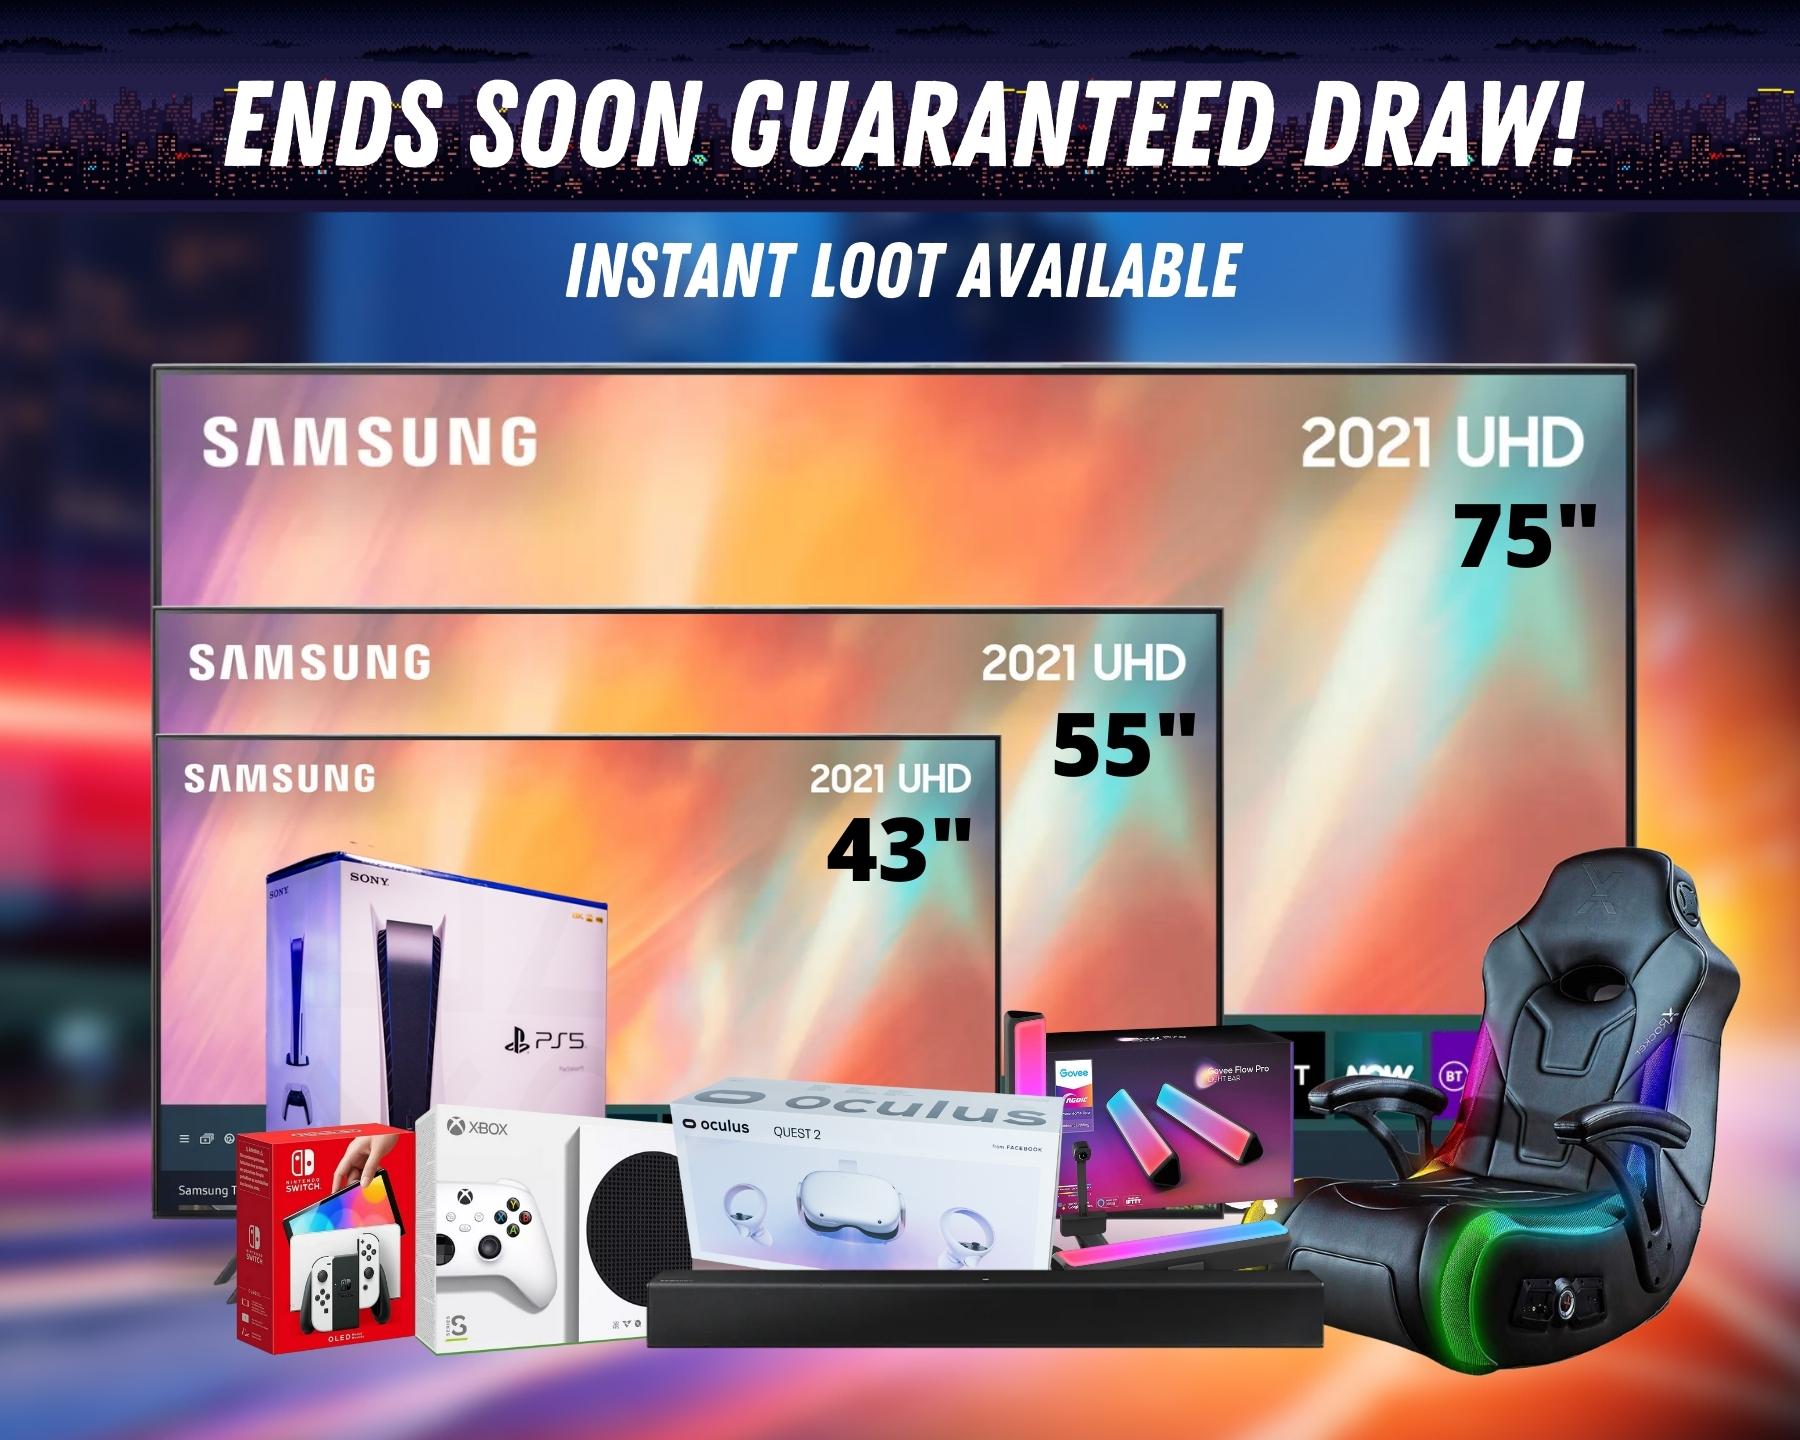 Win this Legendary TV and Console bundle, 3 TVs, 4 Consoles and more with 10 Instant Loots!